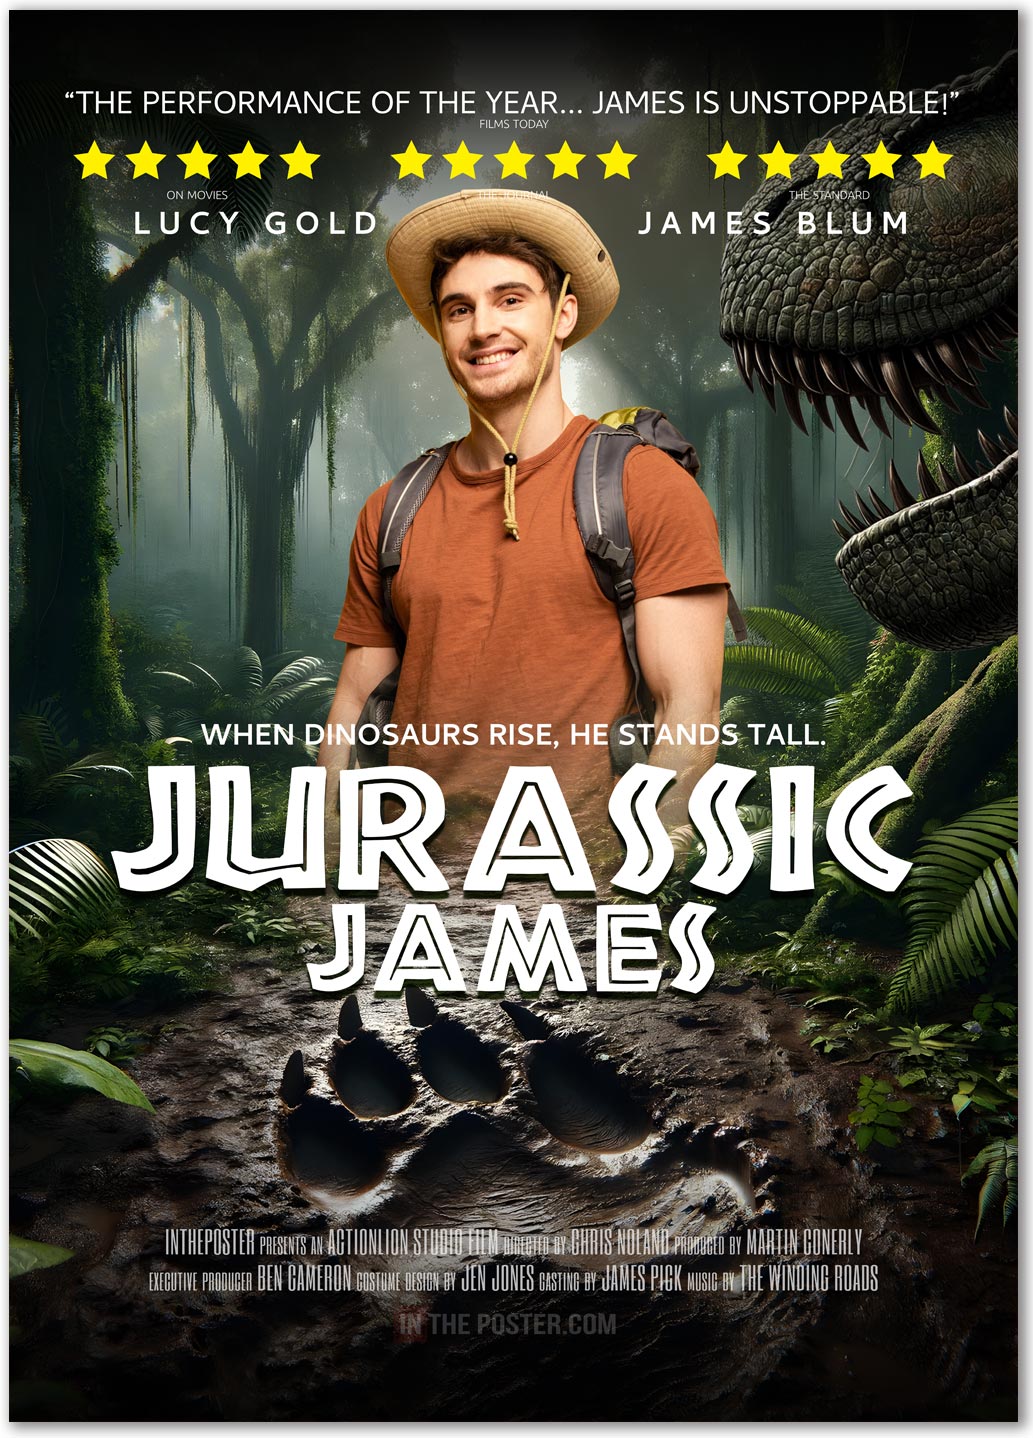 A man in an orange t-shirt and hat stands in a jungle with a t-rex leaning over to him. A dinosaur footprint is in the mud. The images make up a movie poster called Jurassic James.